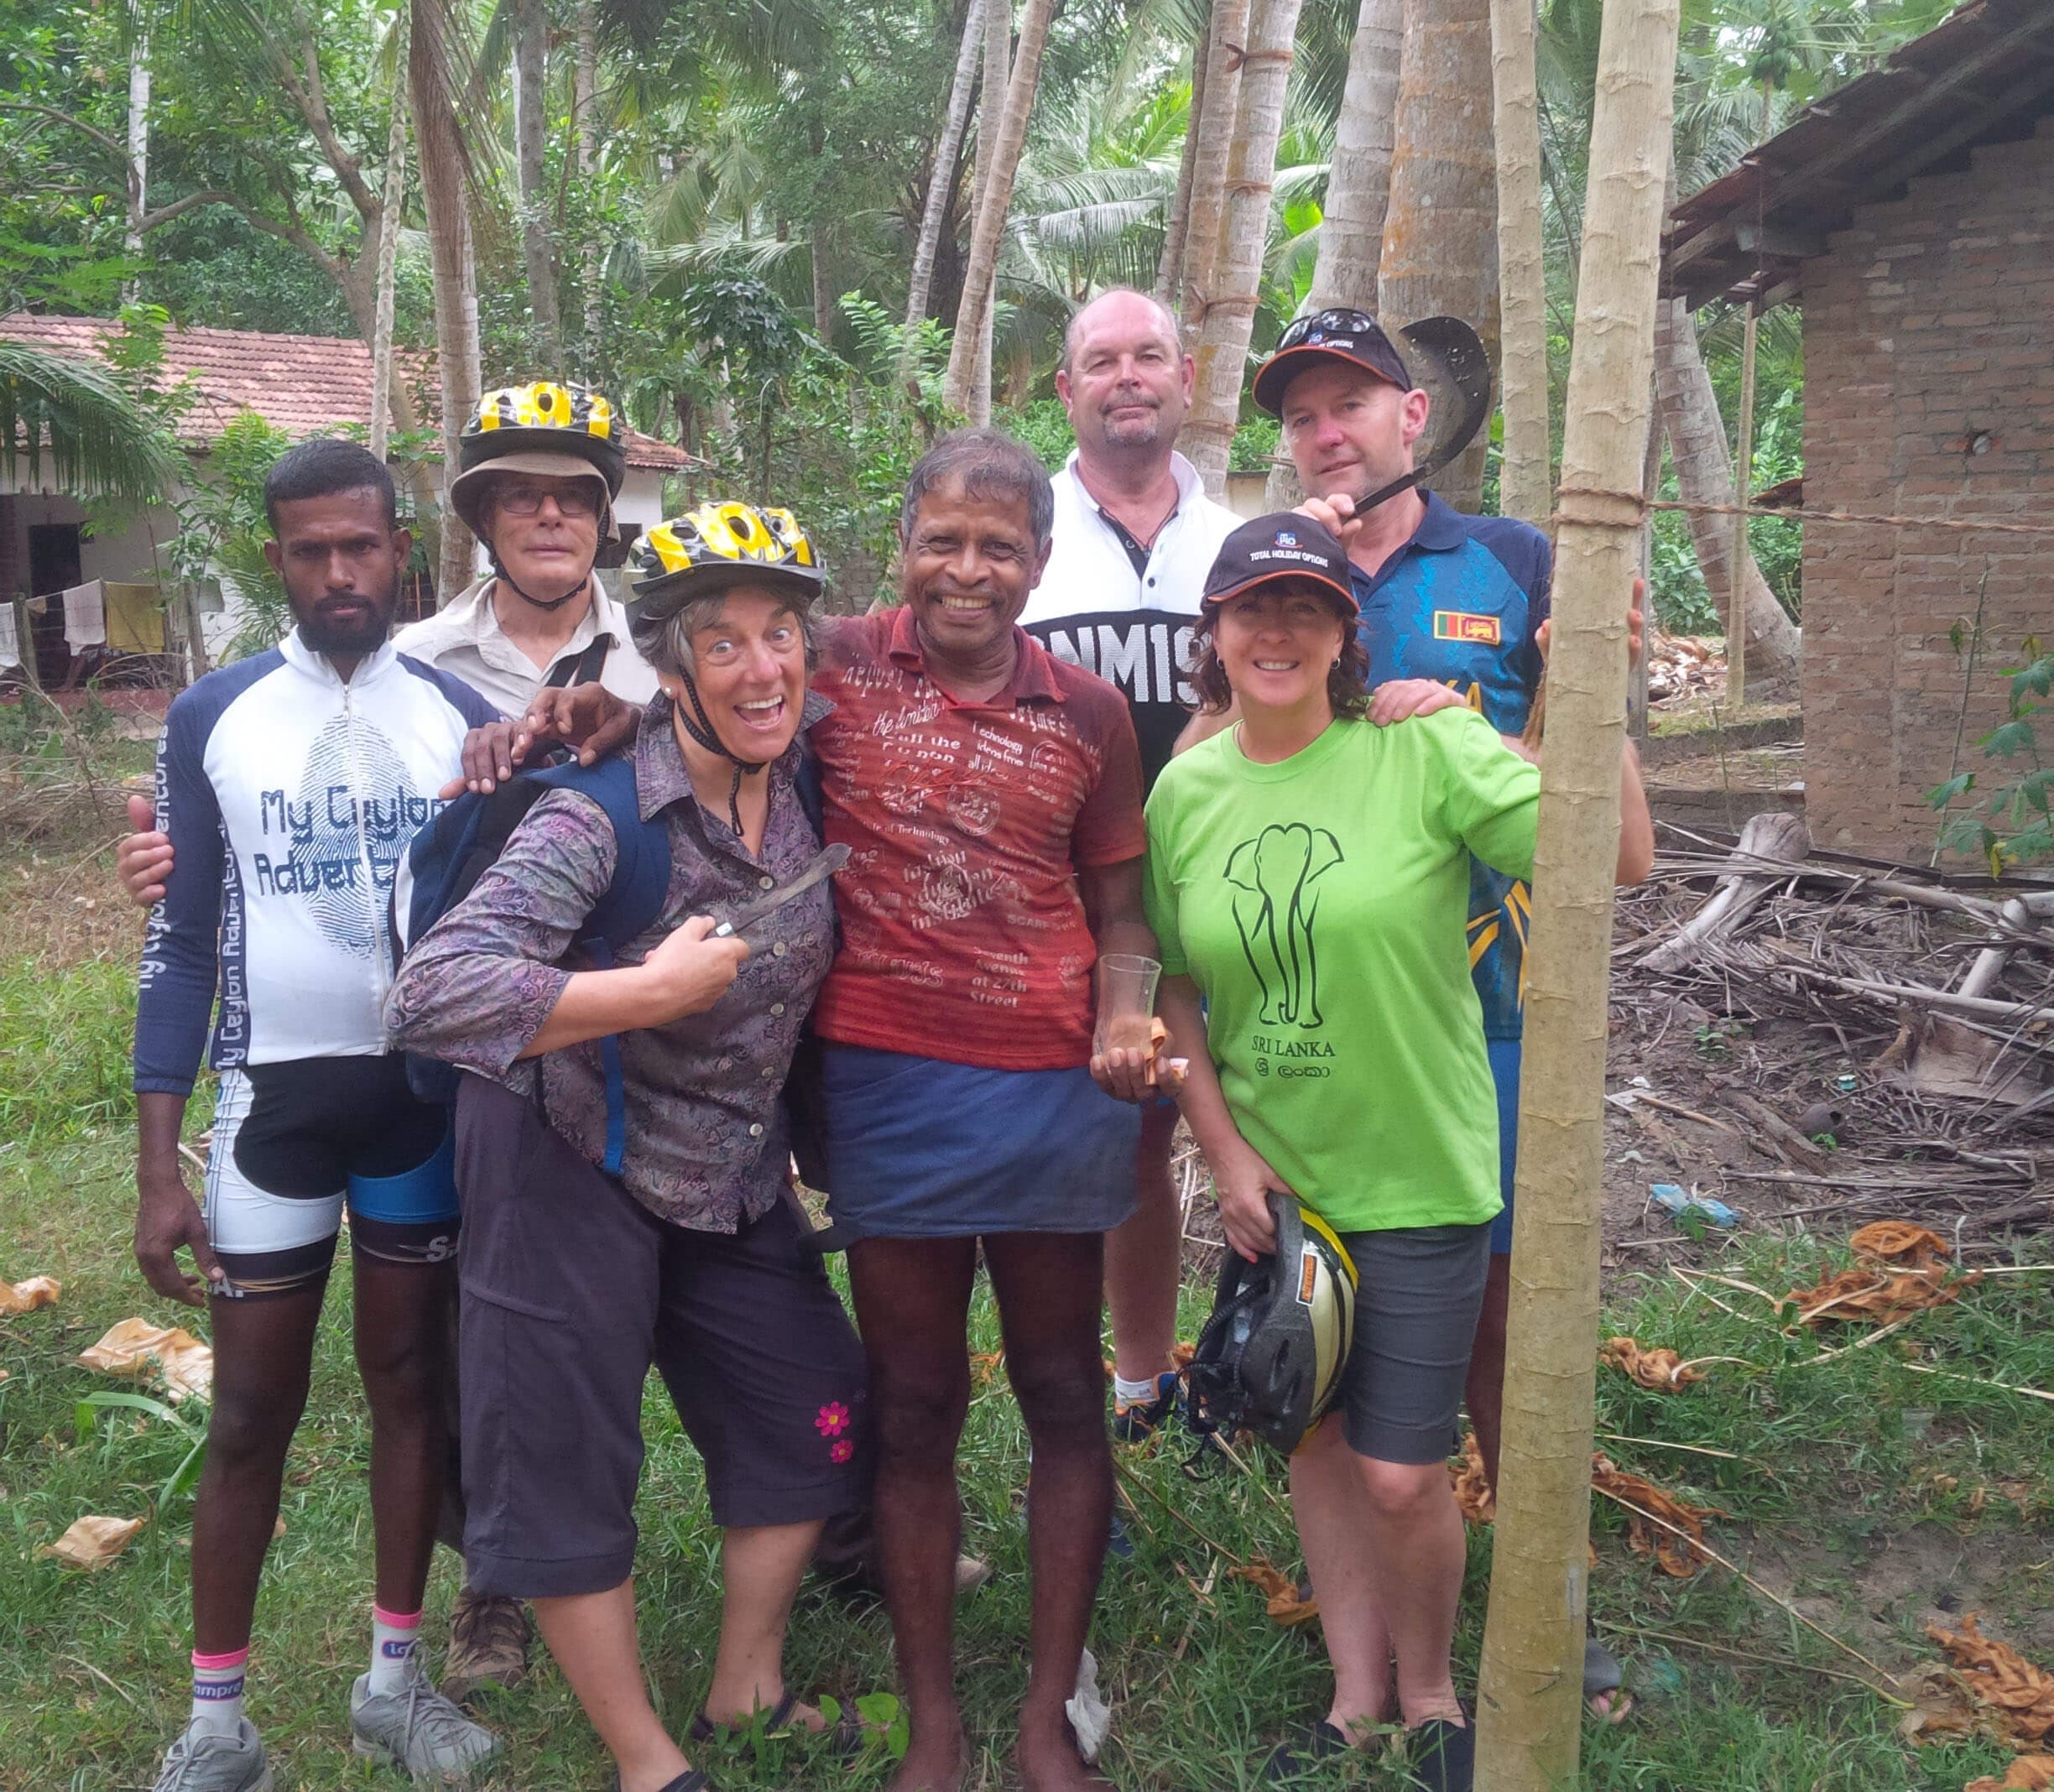 The cyclists group take a photo in palm toddy making area in Negombo